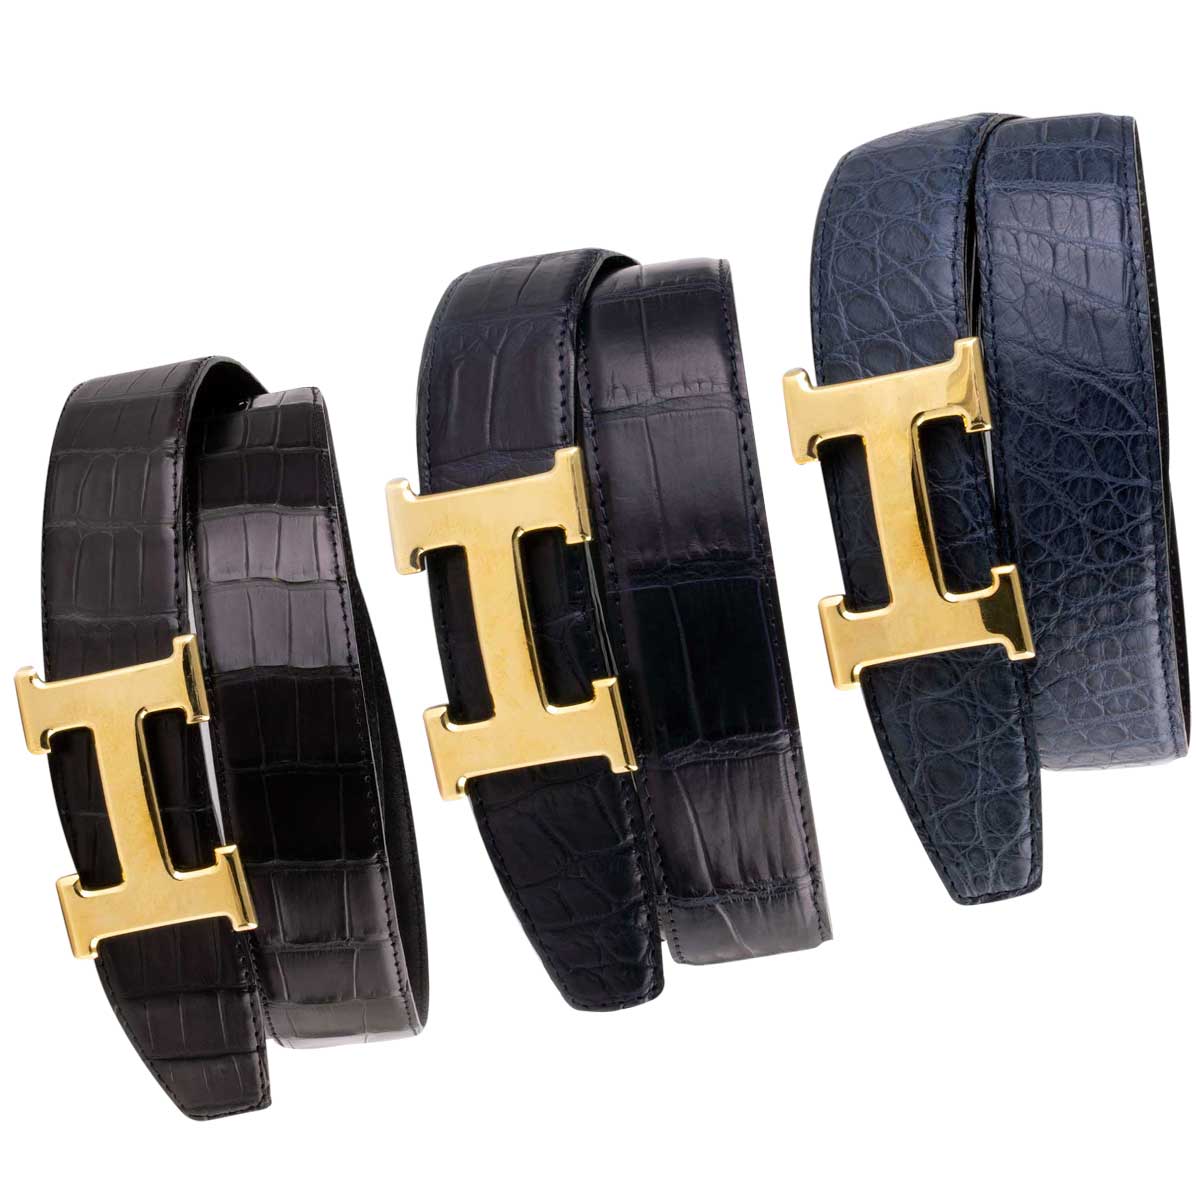 Classic leather belt with polished golden H buckle - Alligator